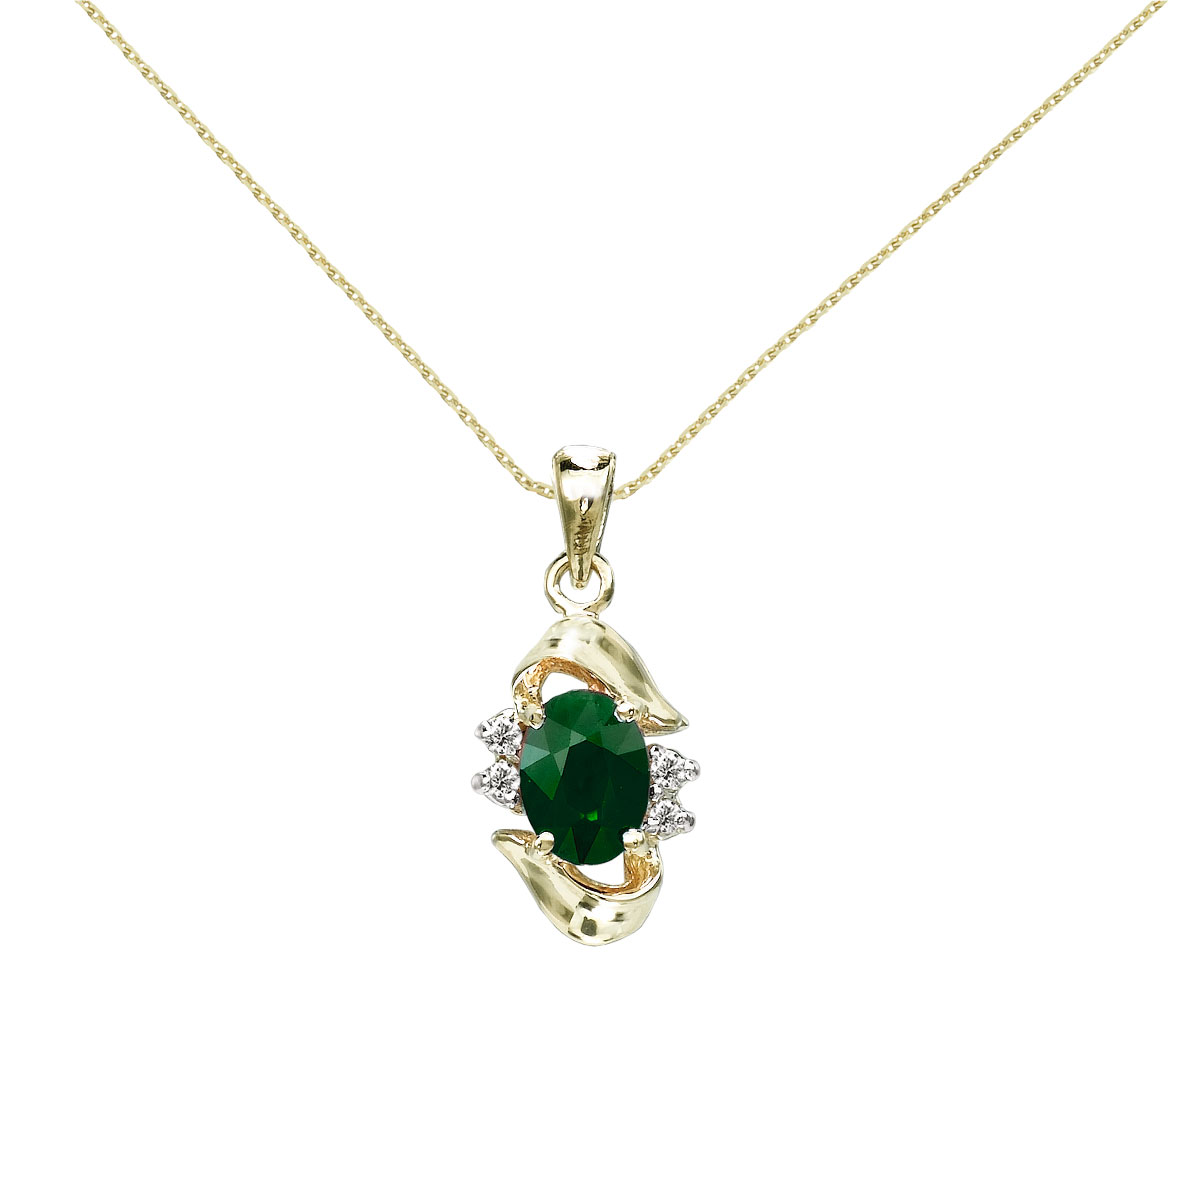 Add a hint of green to your look with this 14k yellow gold emerald pendant. Featuring a genuine 7x5 mm emerald surrounded by .06 carats of sparkling diamonds.